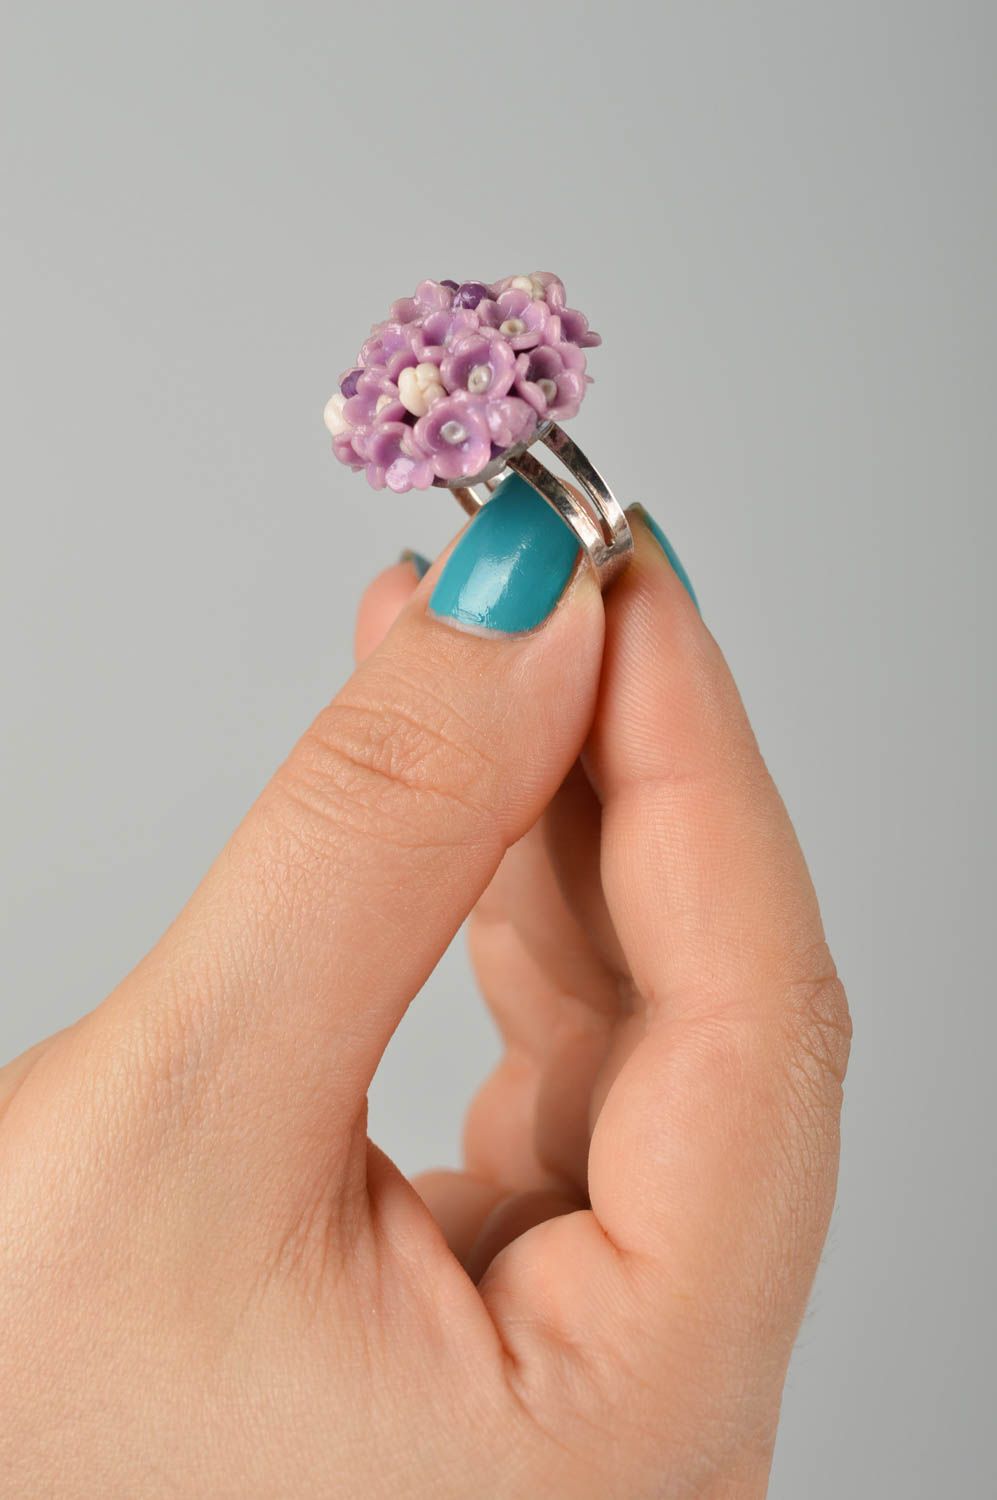 Unusual handmade flower ring plastic ring design polymer clay ideas small gifts photo 3